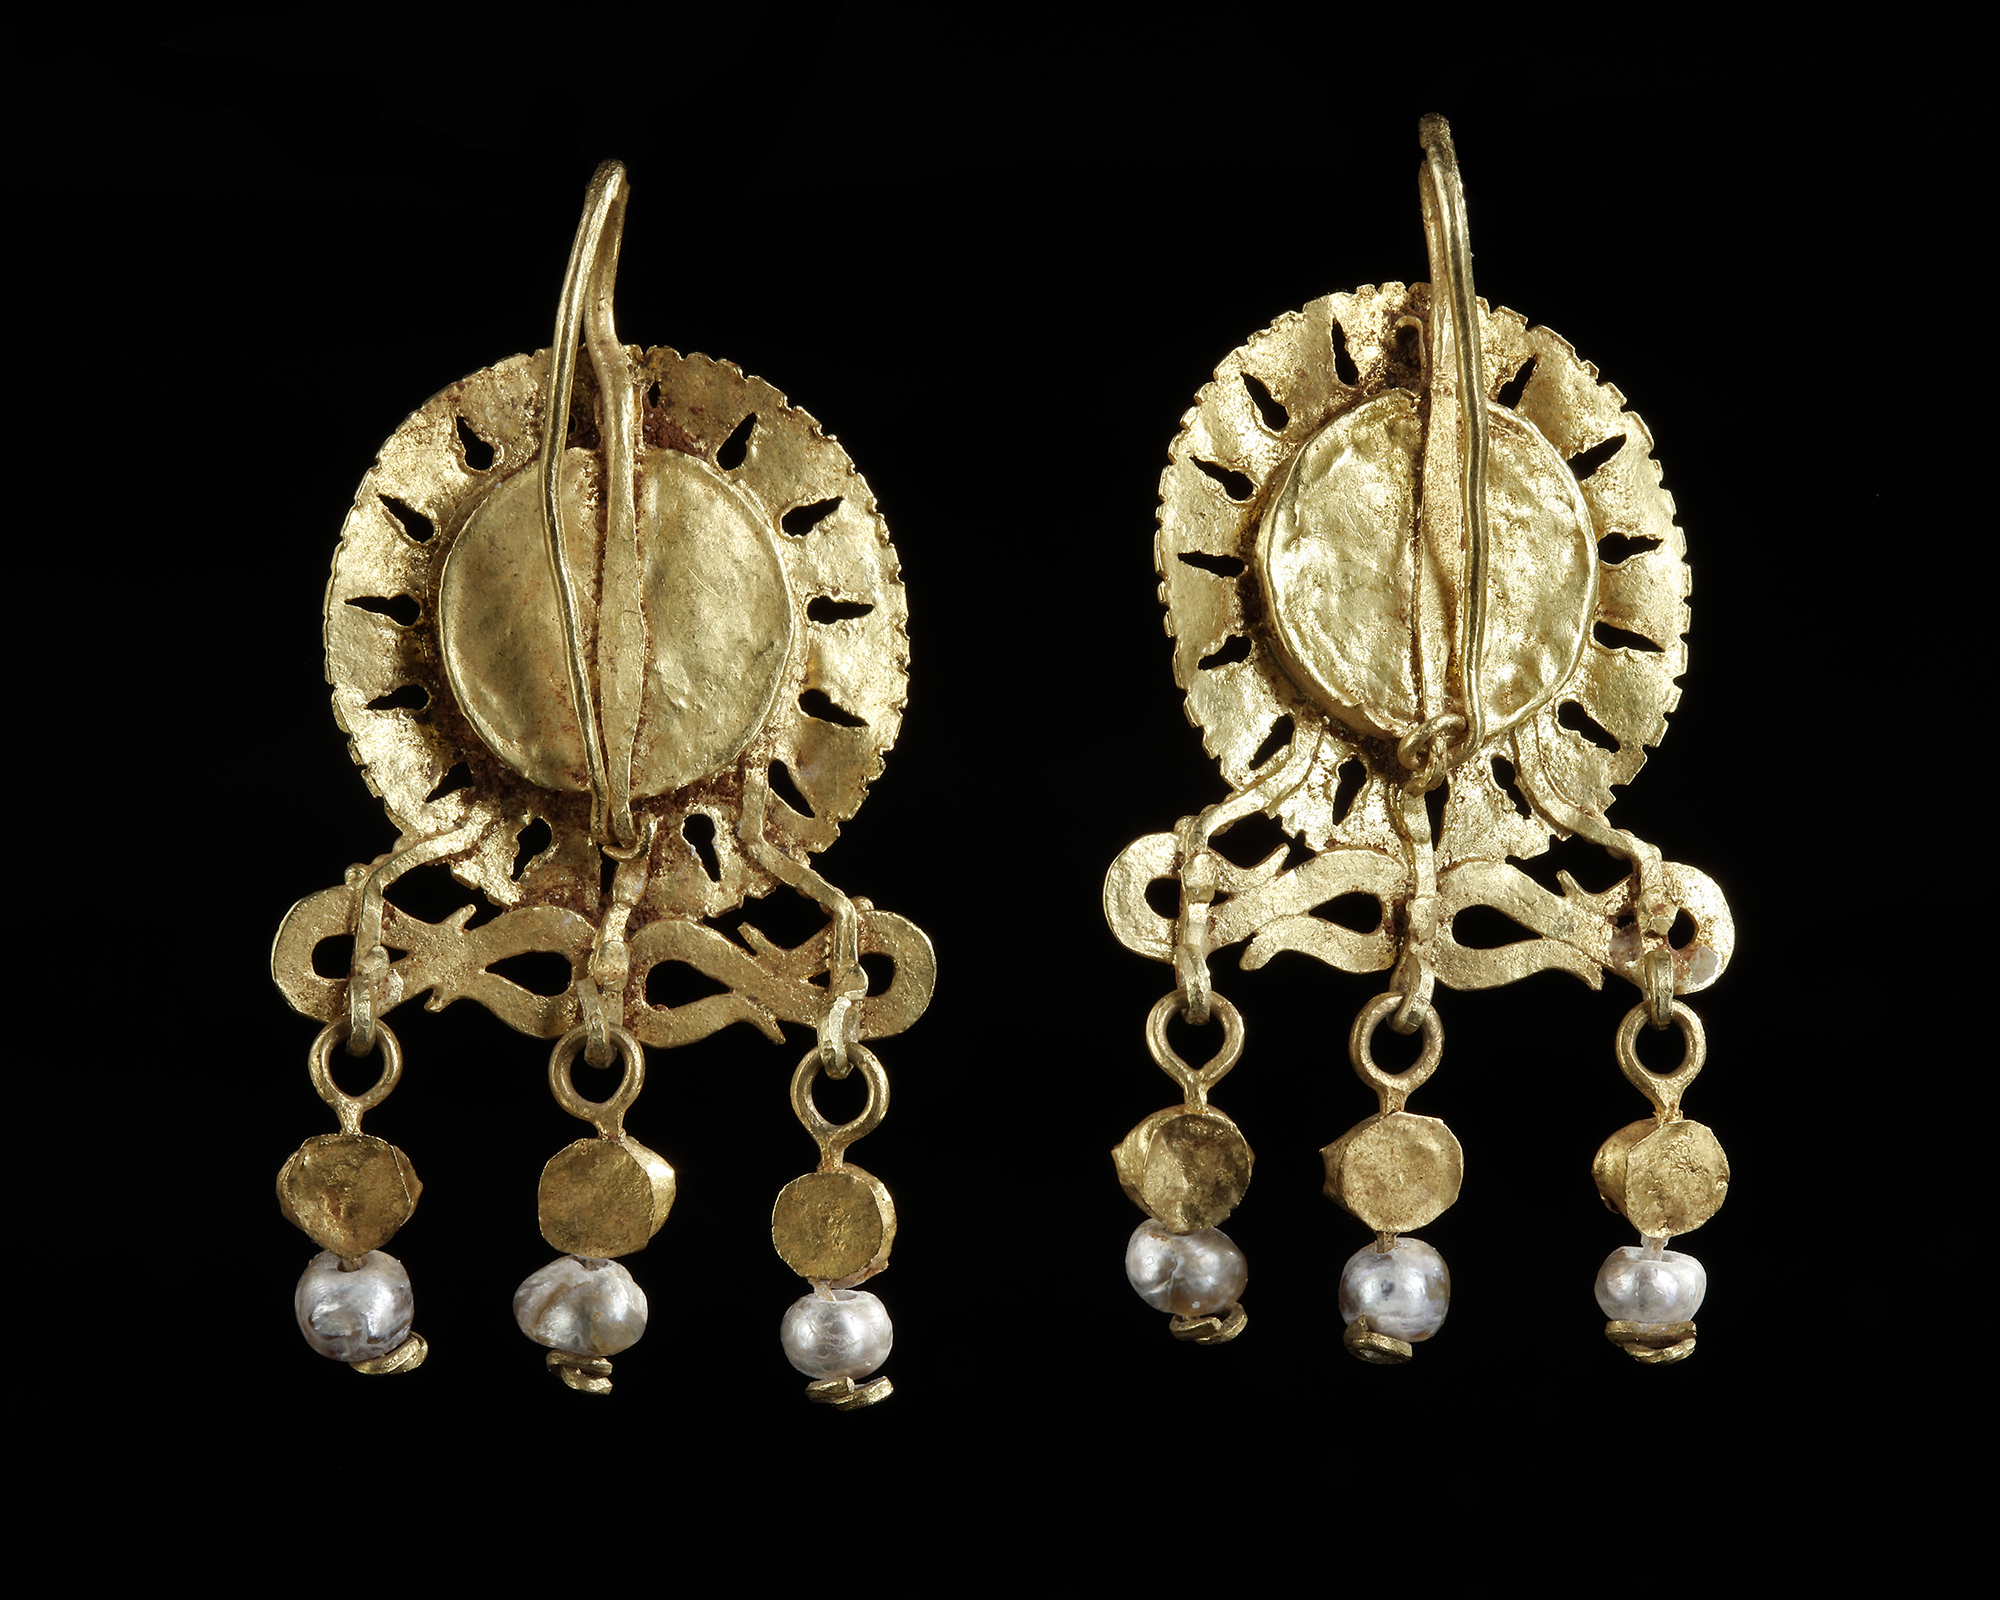 A PAIR OF ROMAN GOLD EARRINGS WITH MEDUSA CAMEOS, CIRCA 2ND-3RD CENTURY A.D. - Image 3 of 3